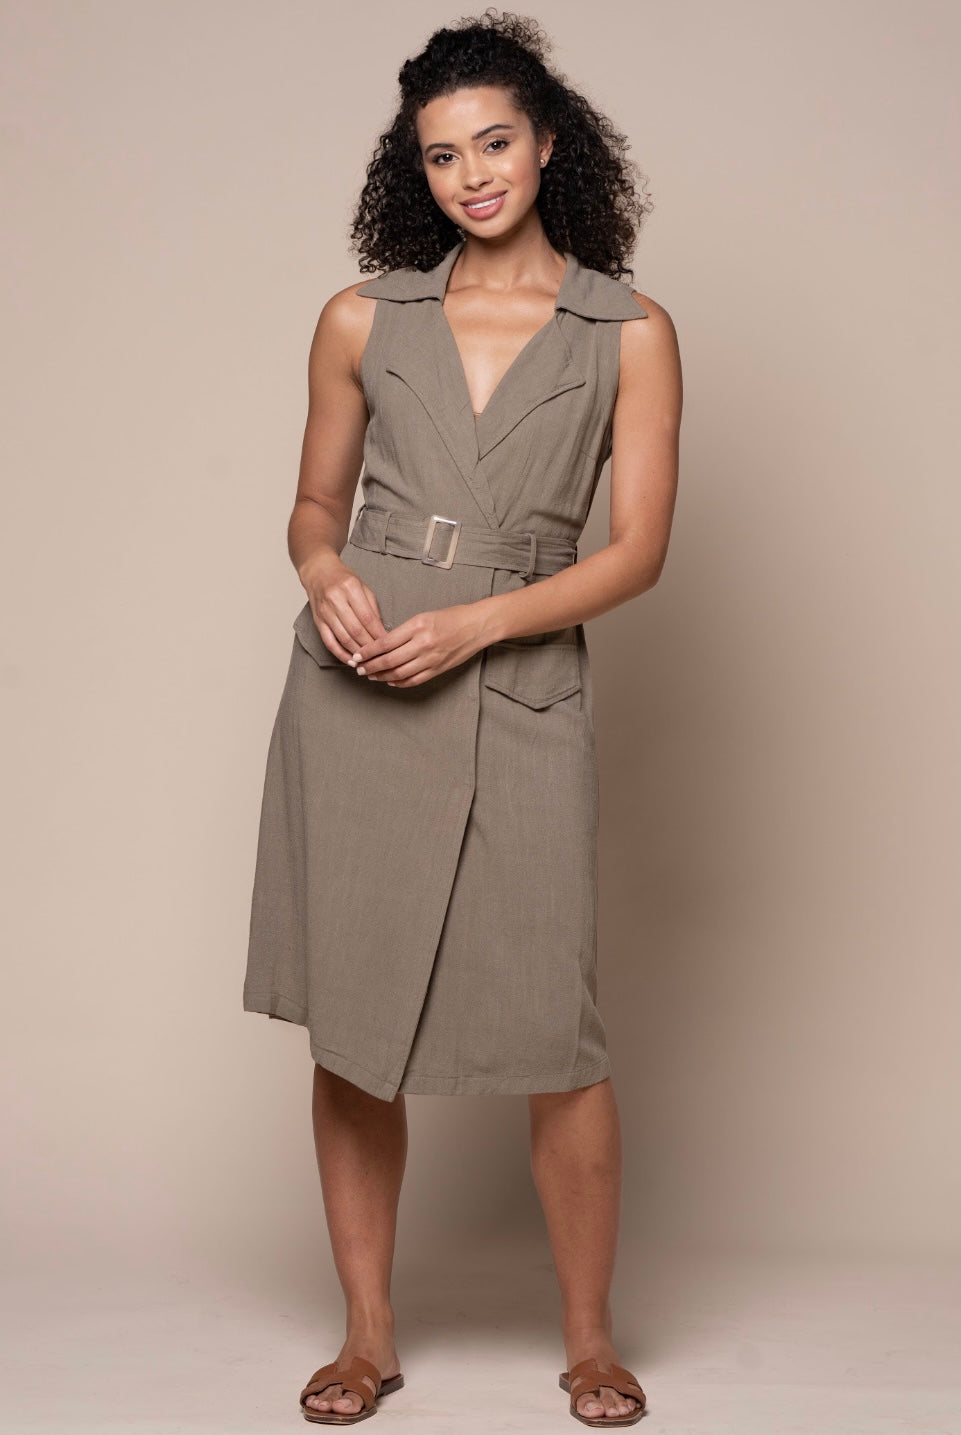 Hint of Perfection Olive Wrap Dress